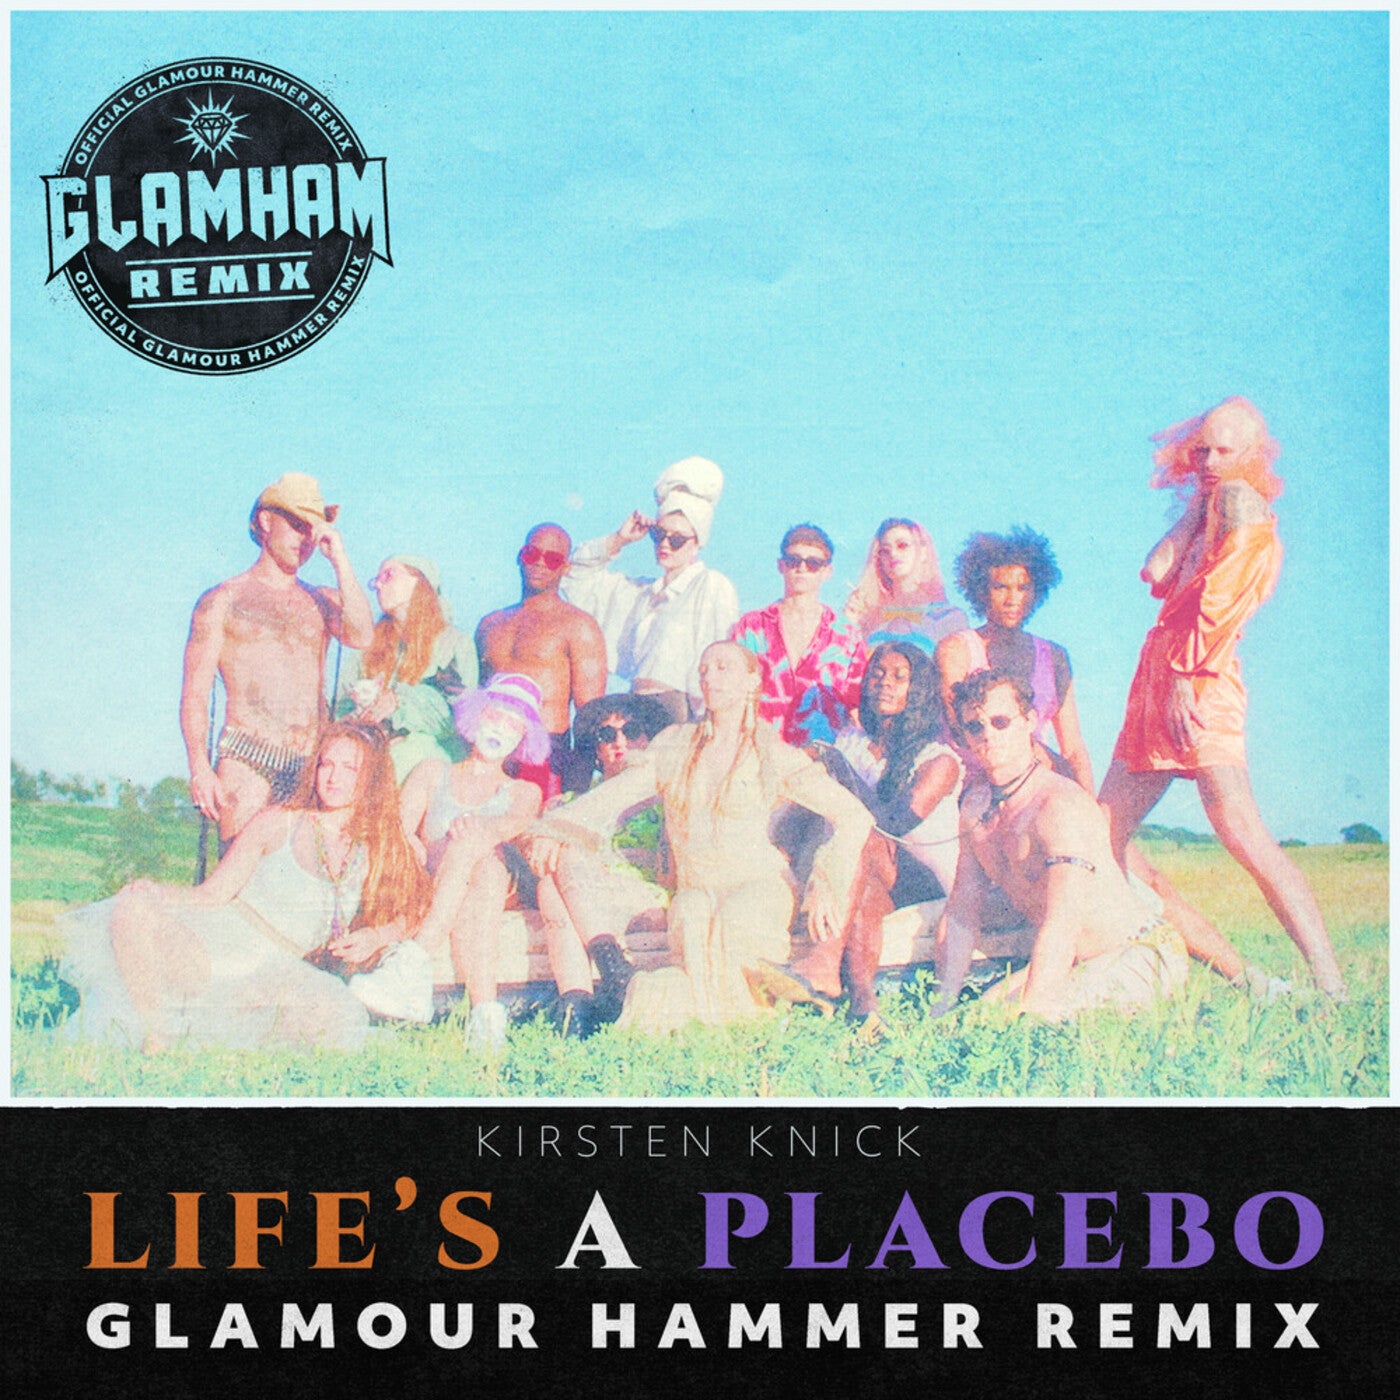 Life's A Placebo (Glamour Hammer Remix)